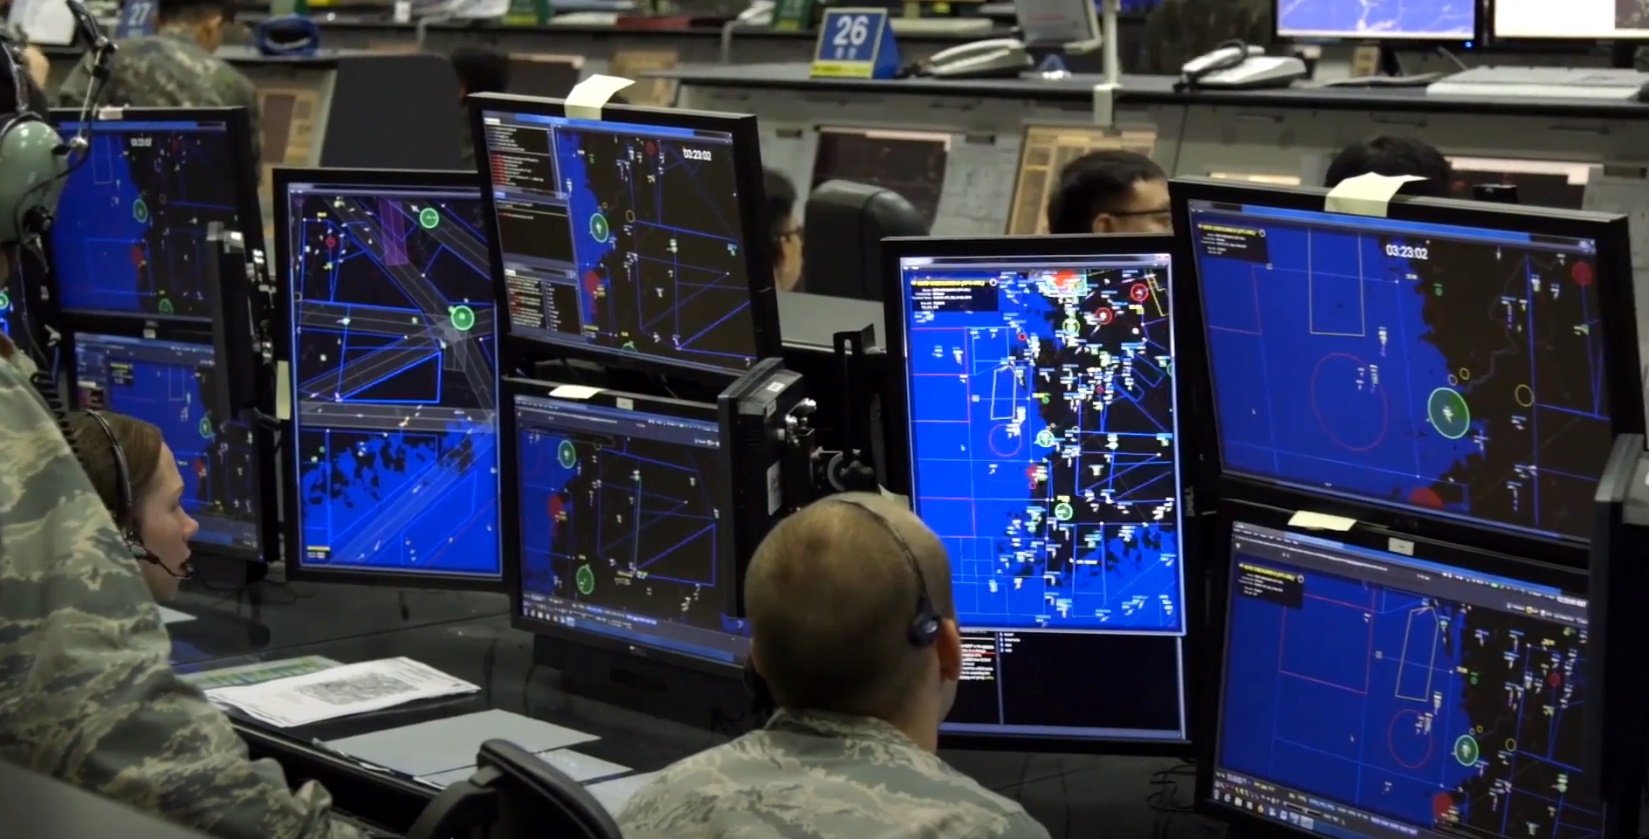 Airborne tactical operations centers are needed for JADC2; Northern Edge demoed one in a KC-135